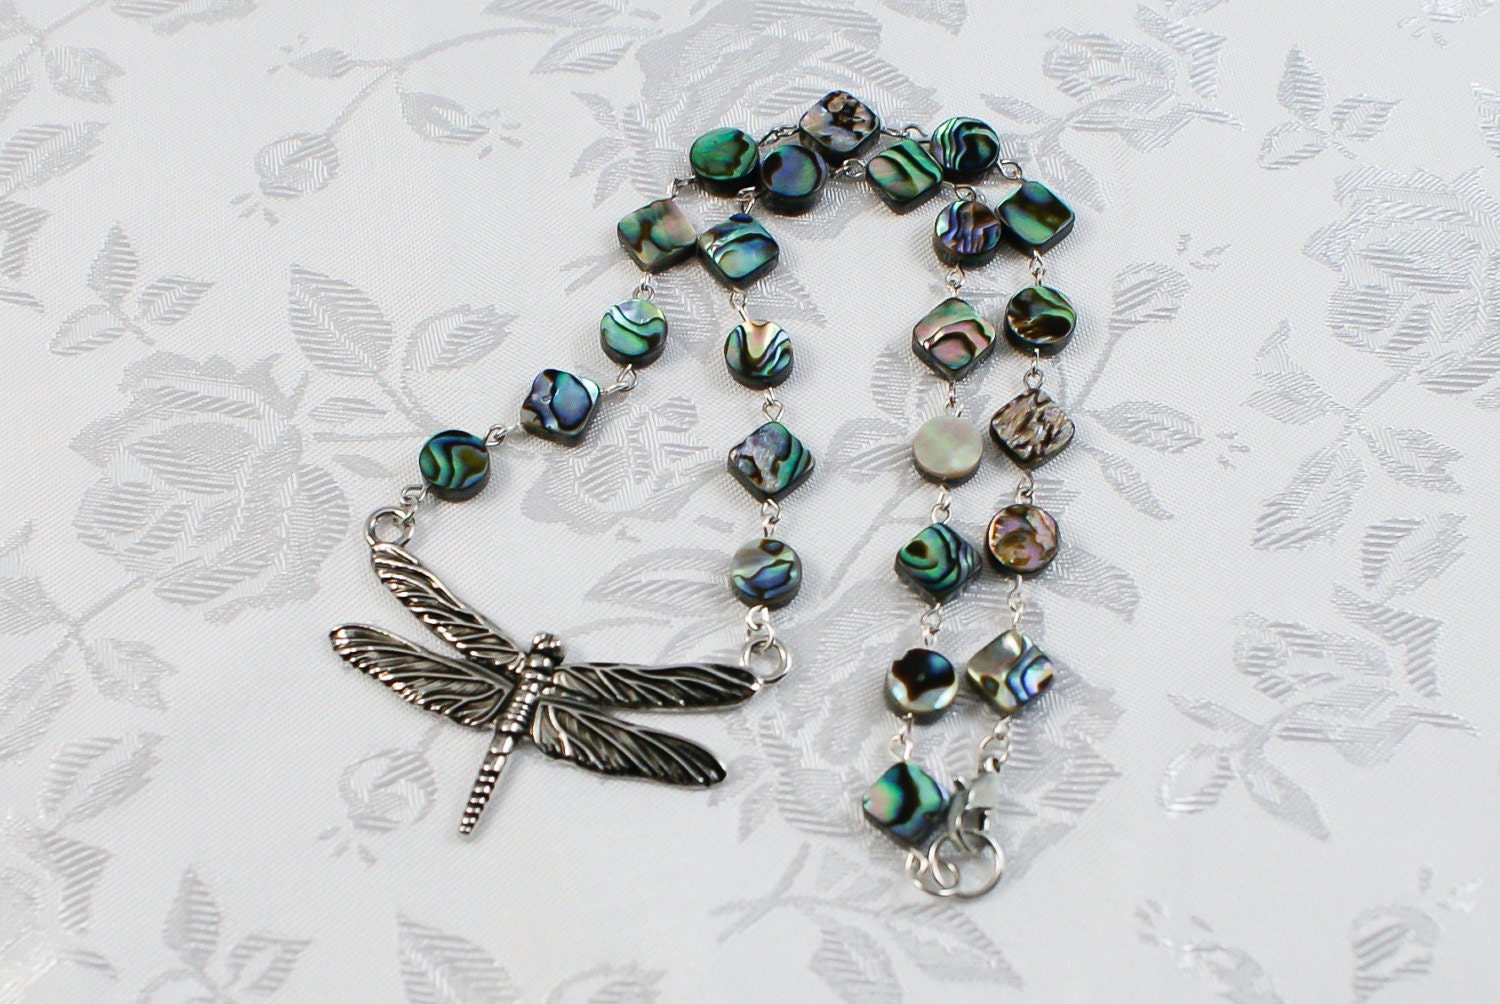 Dragonfly abalone necklace, dragonfly necklace, abalone necklace, dragonfly jewelry, metal dragonfly, abalone jewelry, abalone dragonfly - JavaJaneJewelry